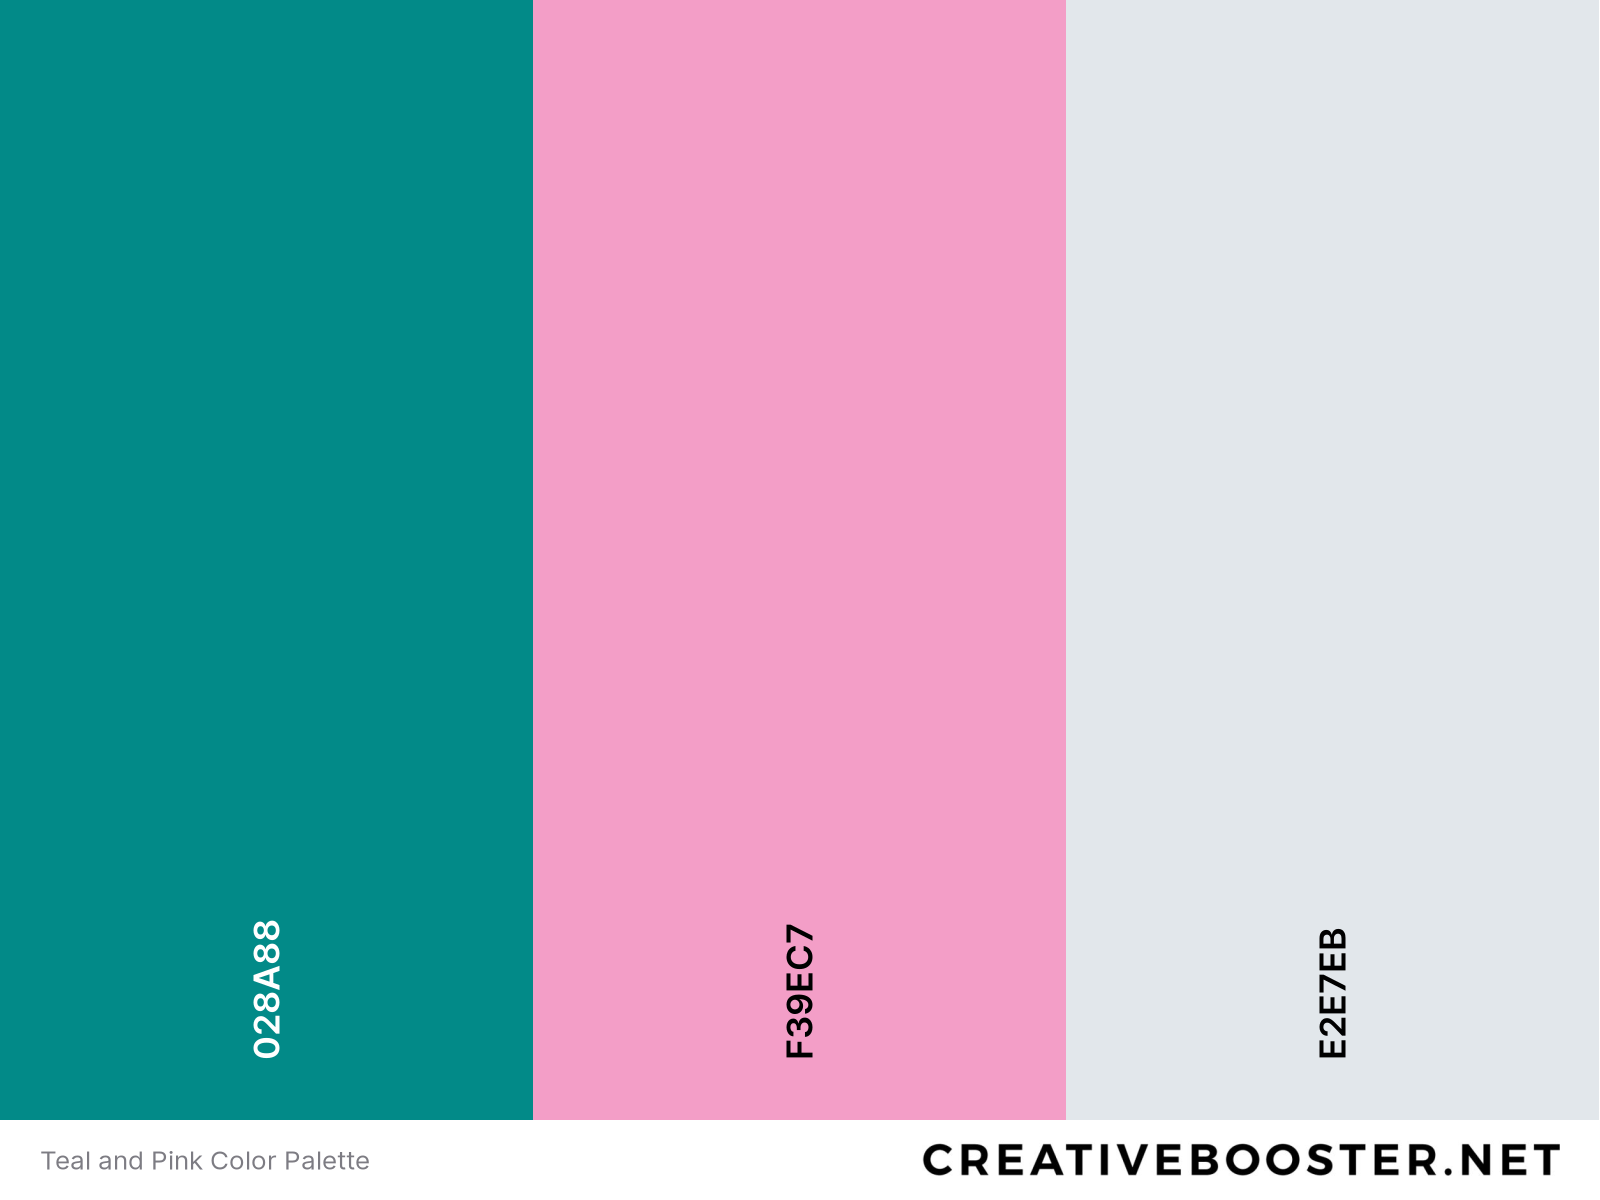 Teal and Pink Color Palette